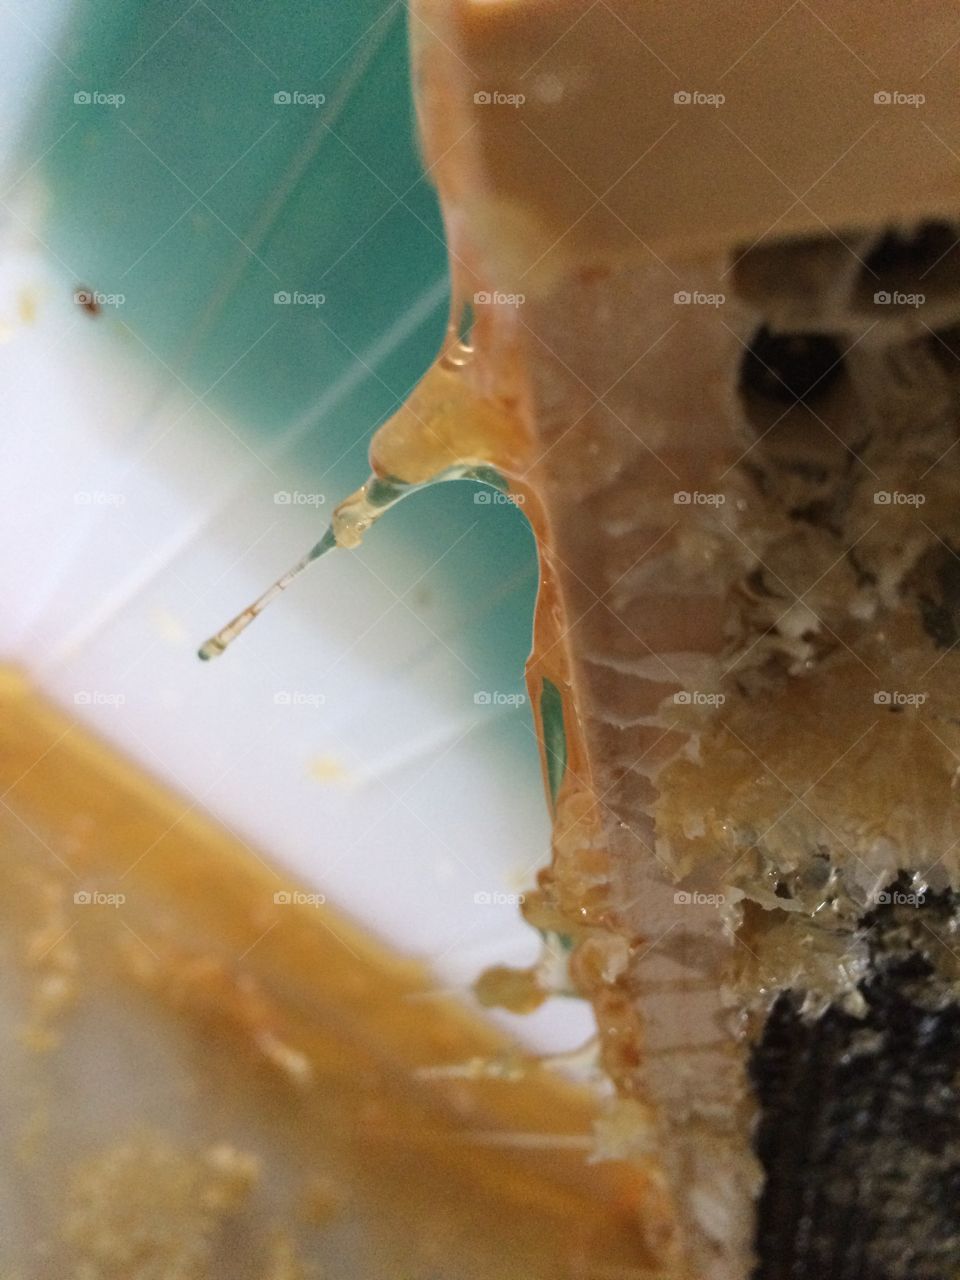 Honey starting to drip from a honeycomb during honey harvest